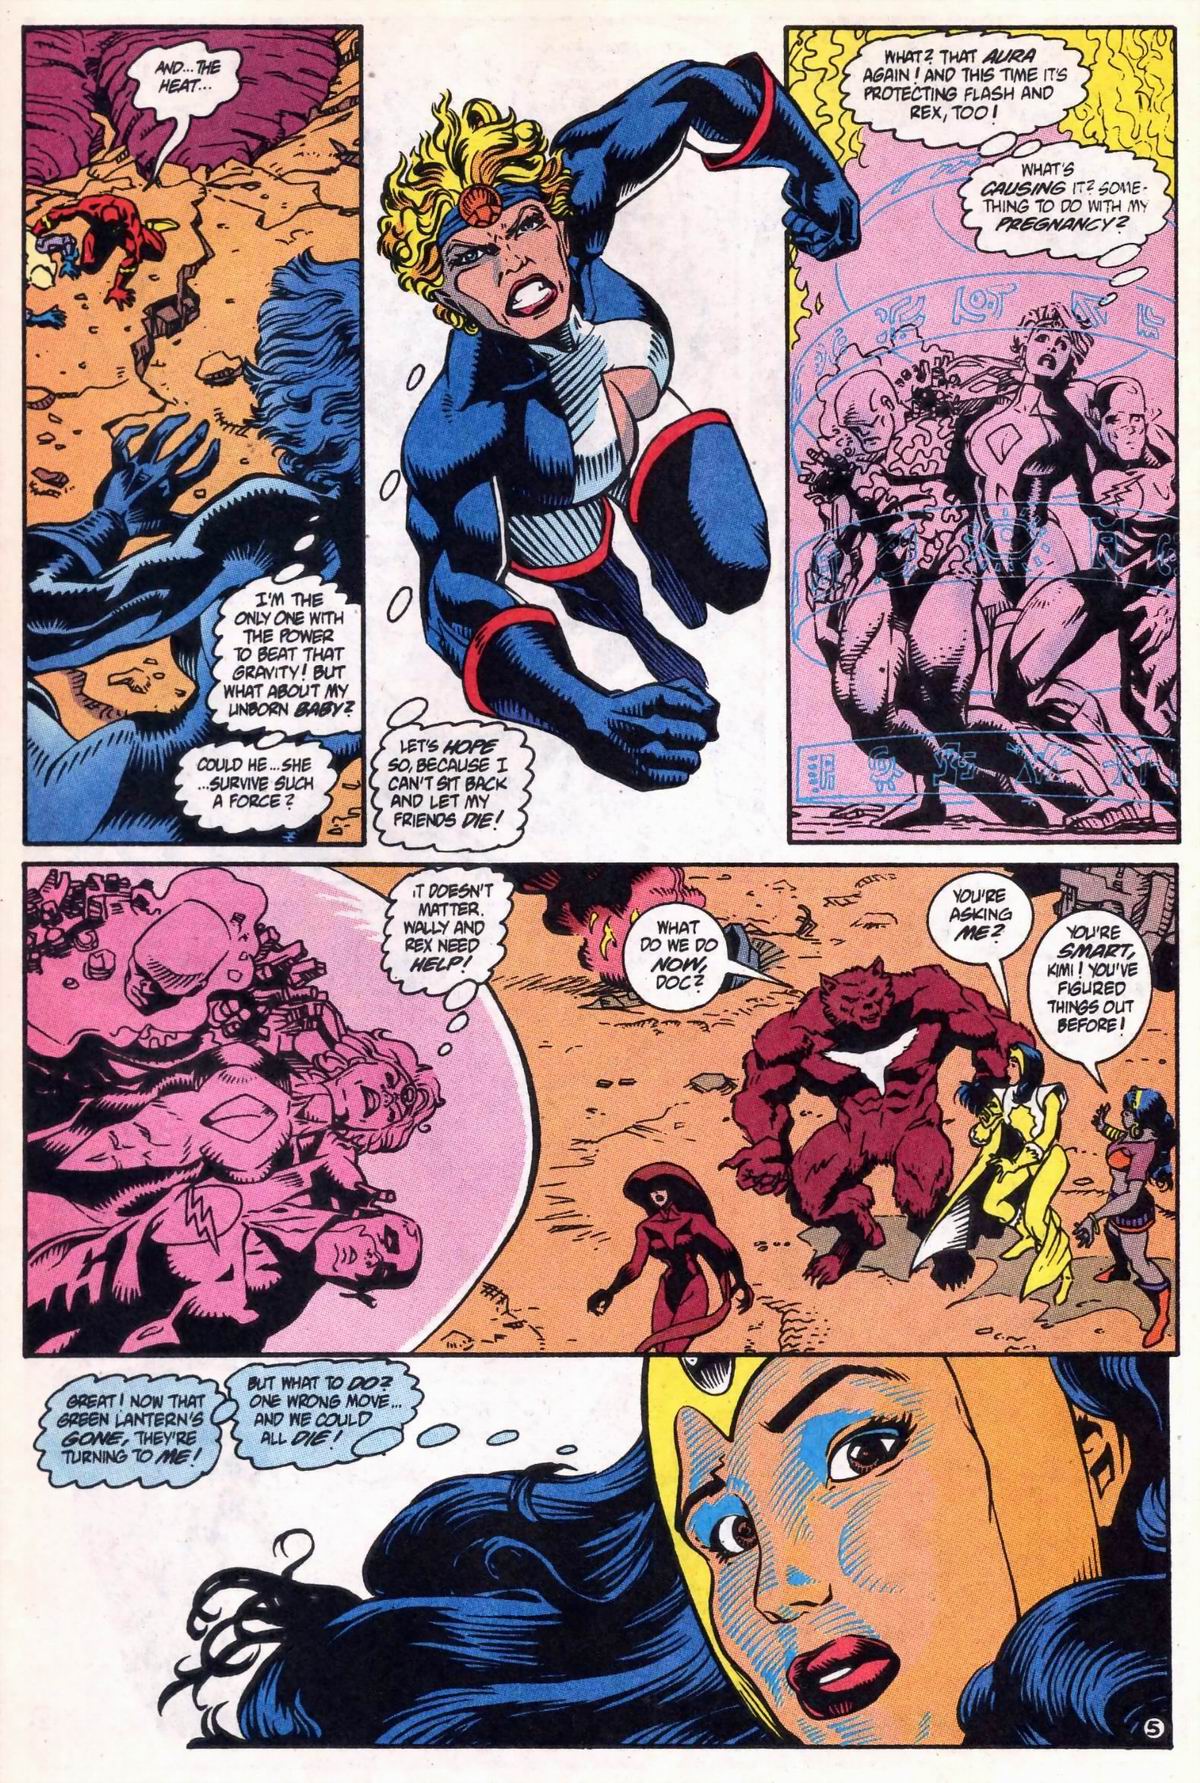 Justice League International (1993) 62 Page 6